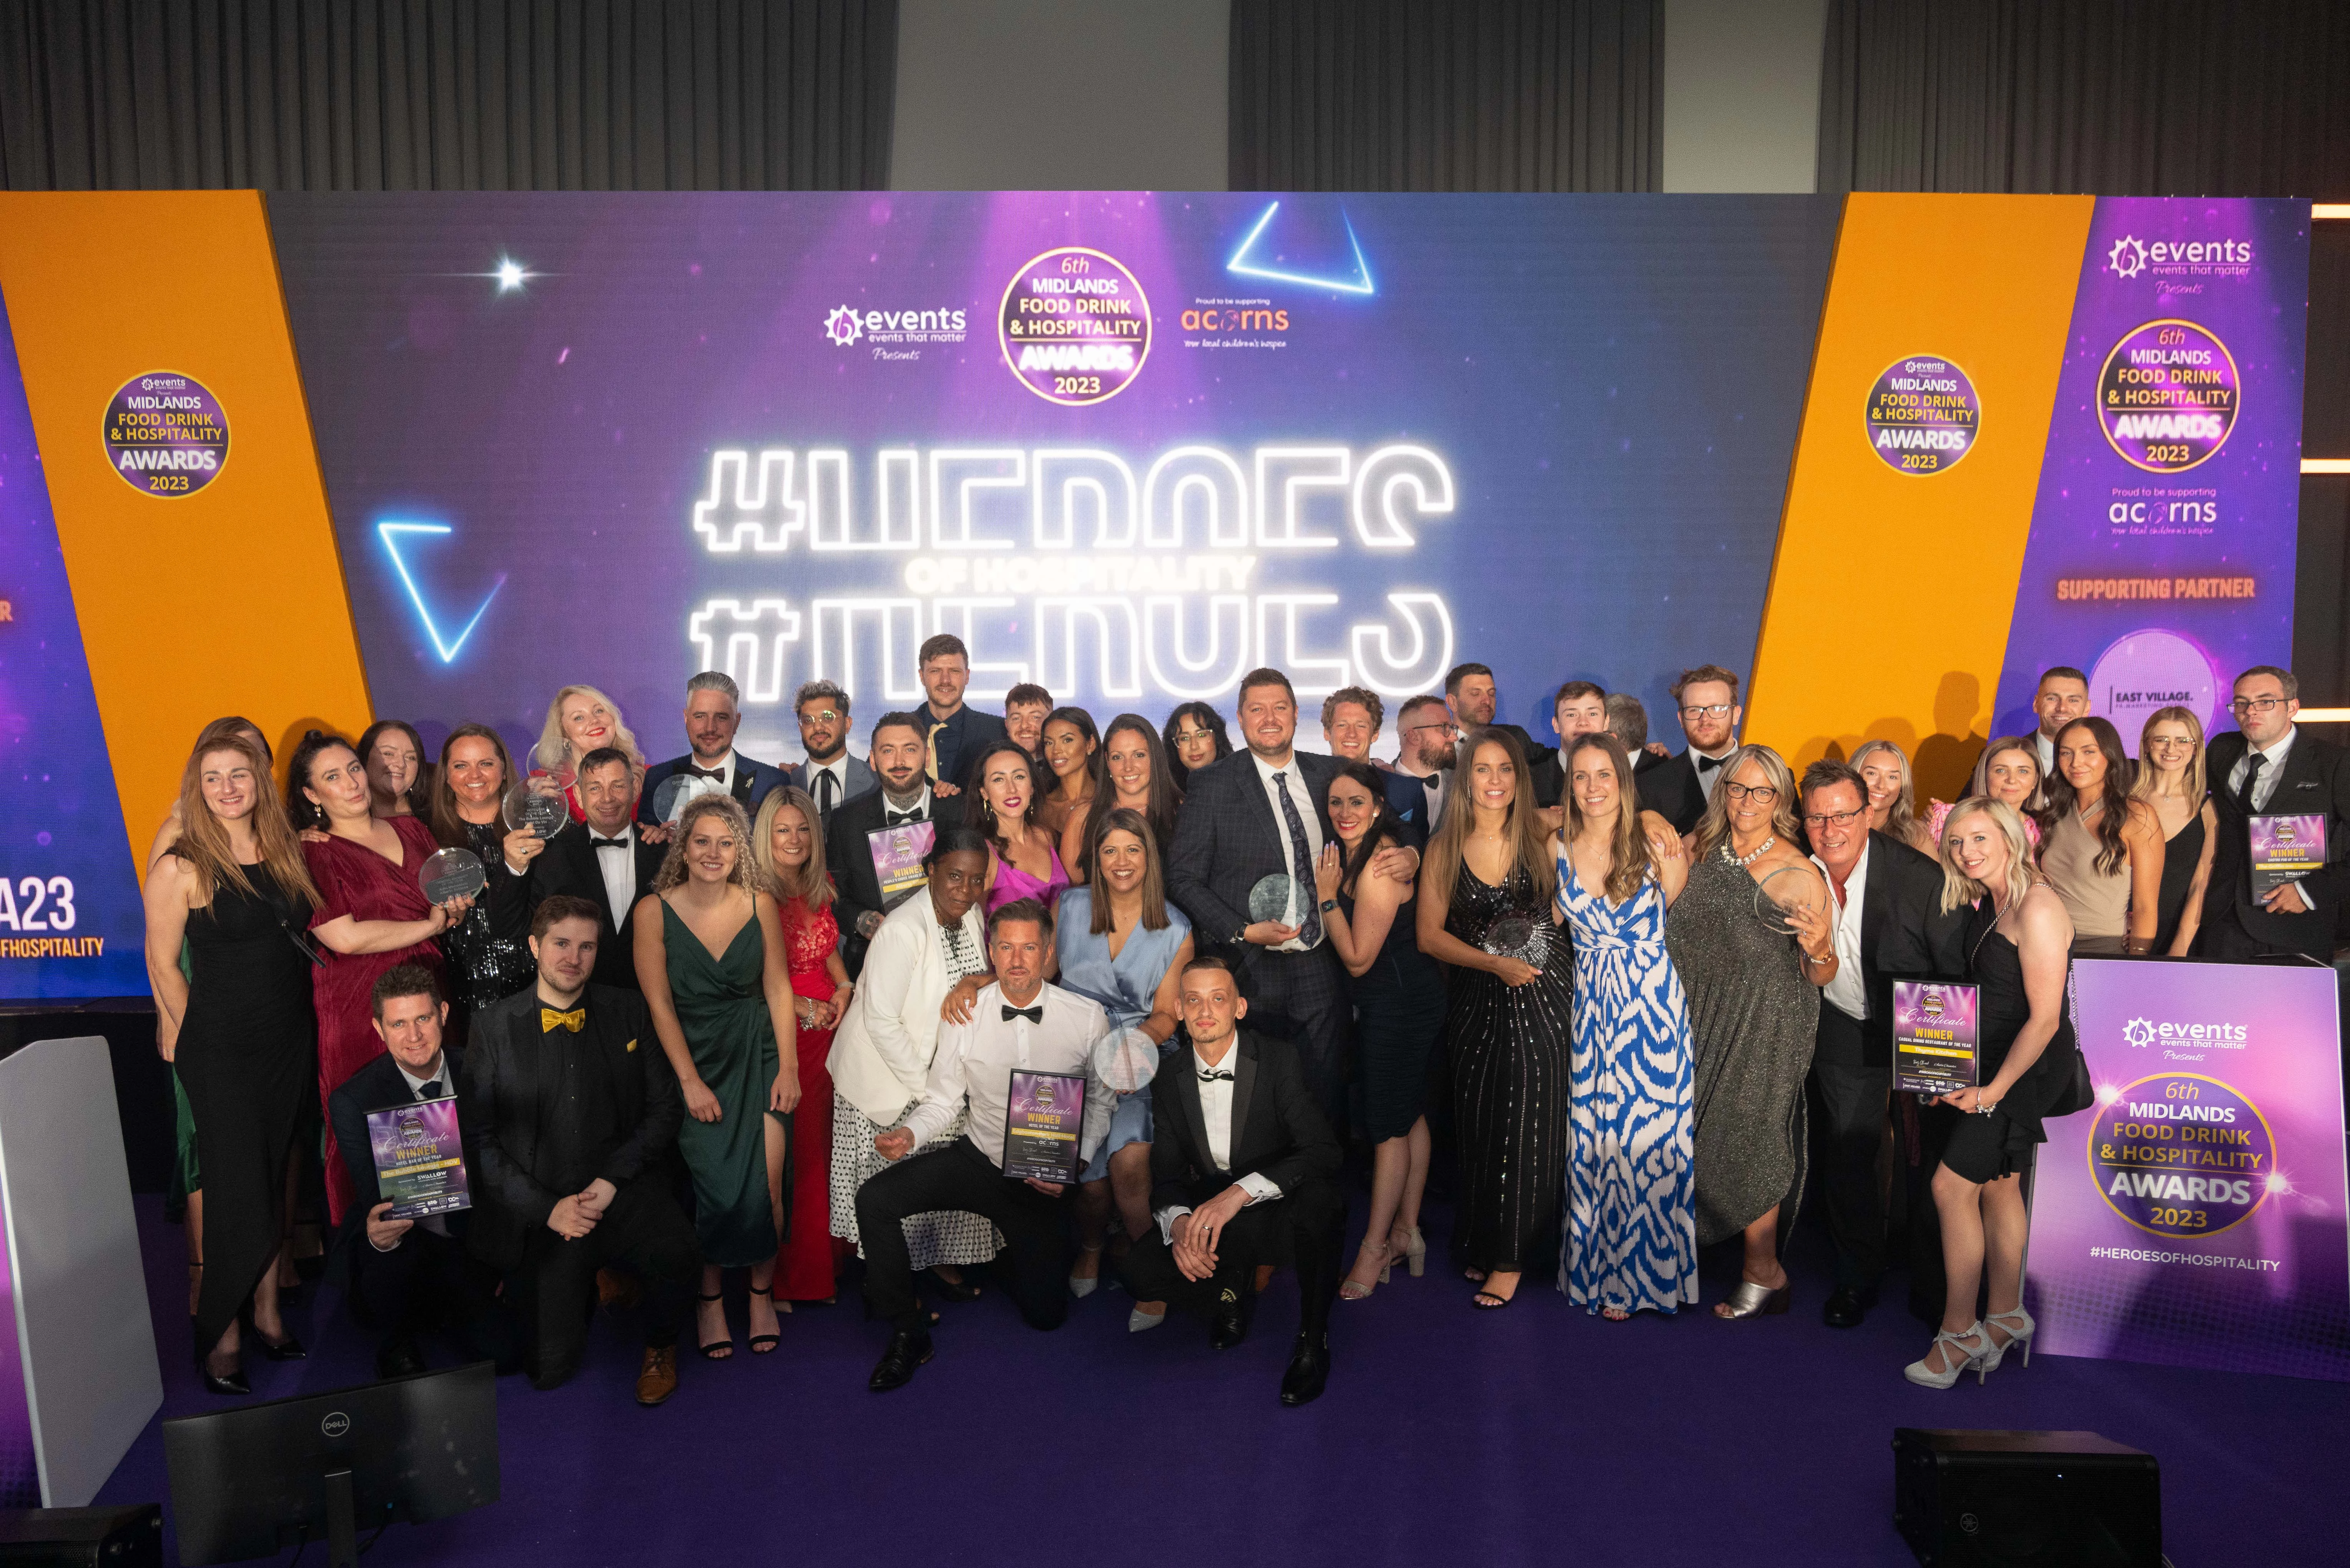 Winners of the Midlands Food, Drink and Hospitality Awards 2023 